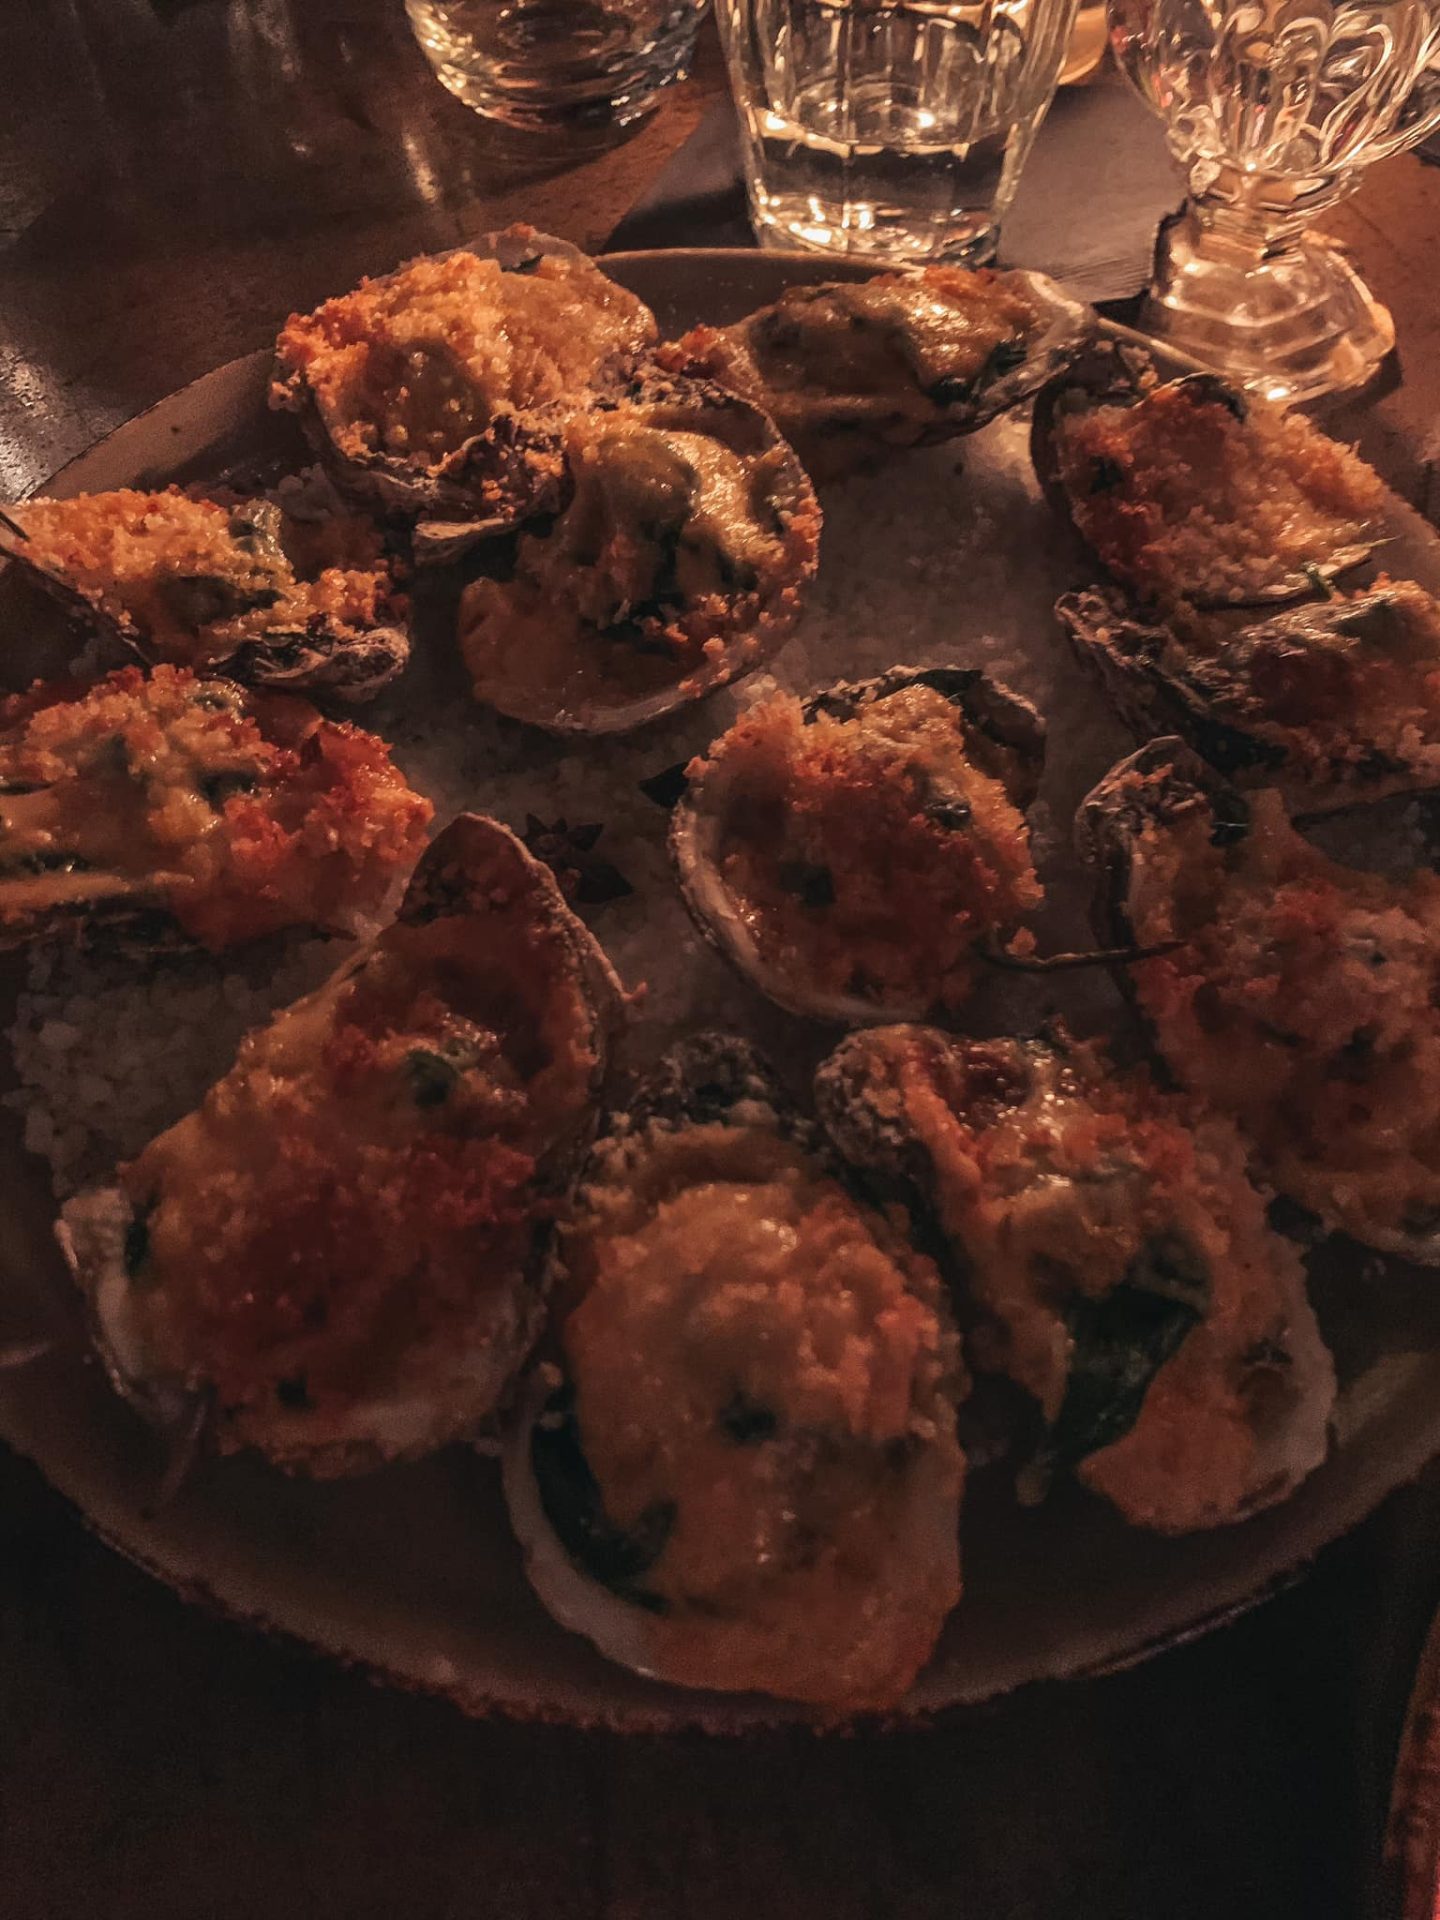 Grilled oysters from Gin Joint bar in Tampa